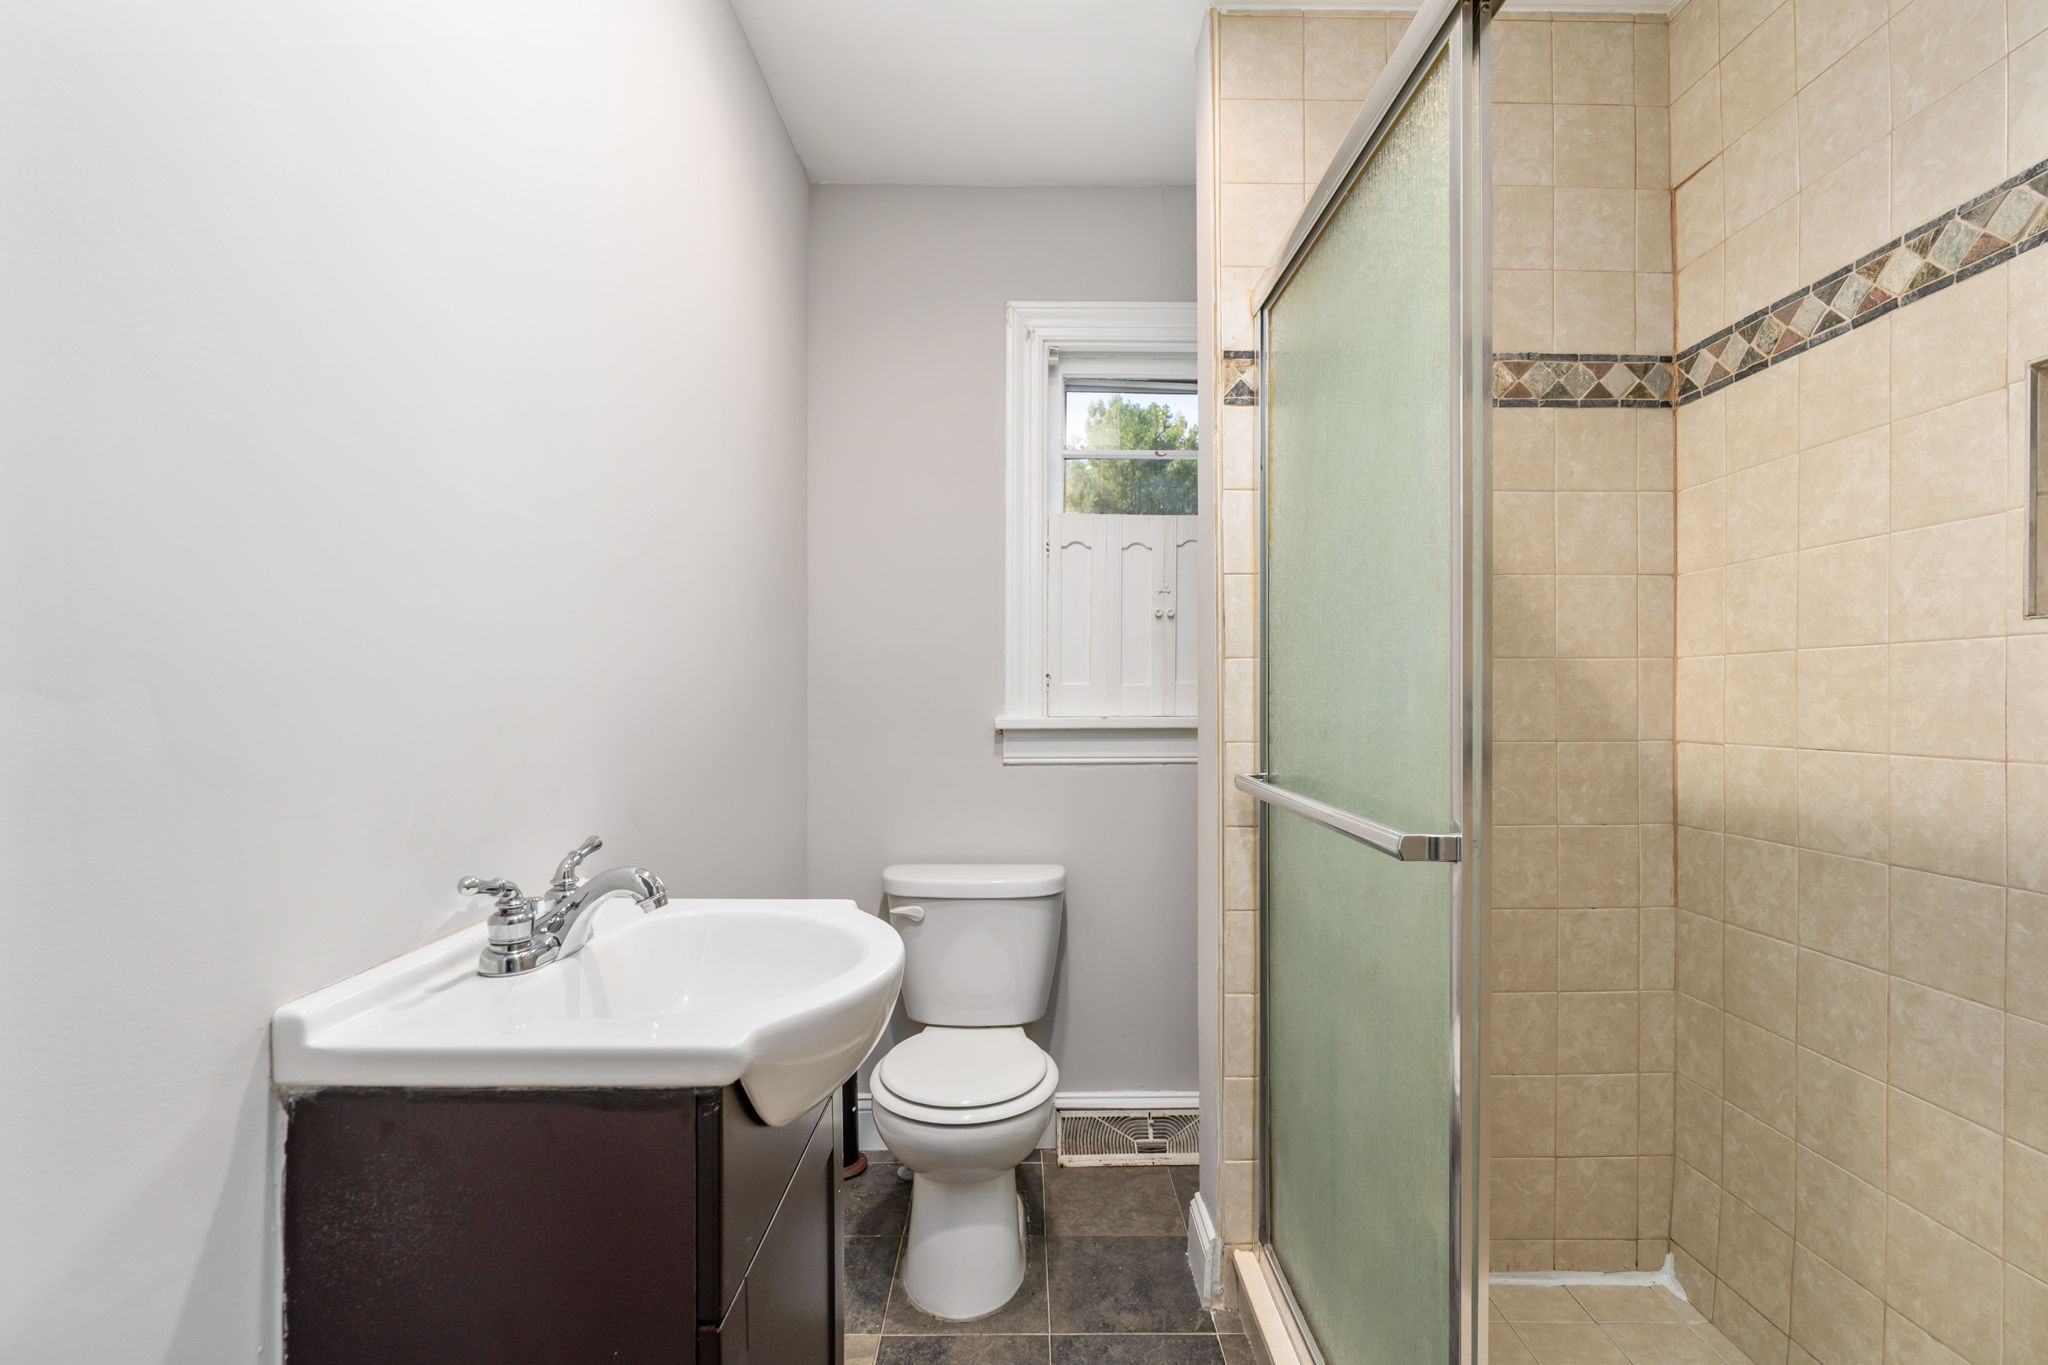 Bathroom offers ceramic tile shower with multiple shower heads!